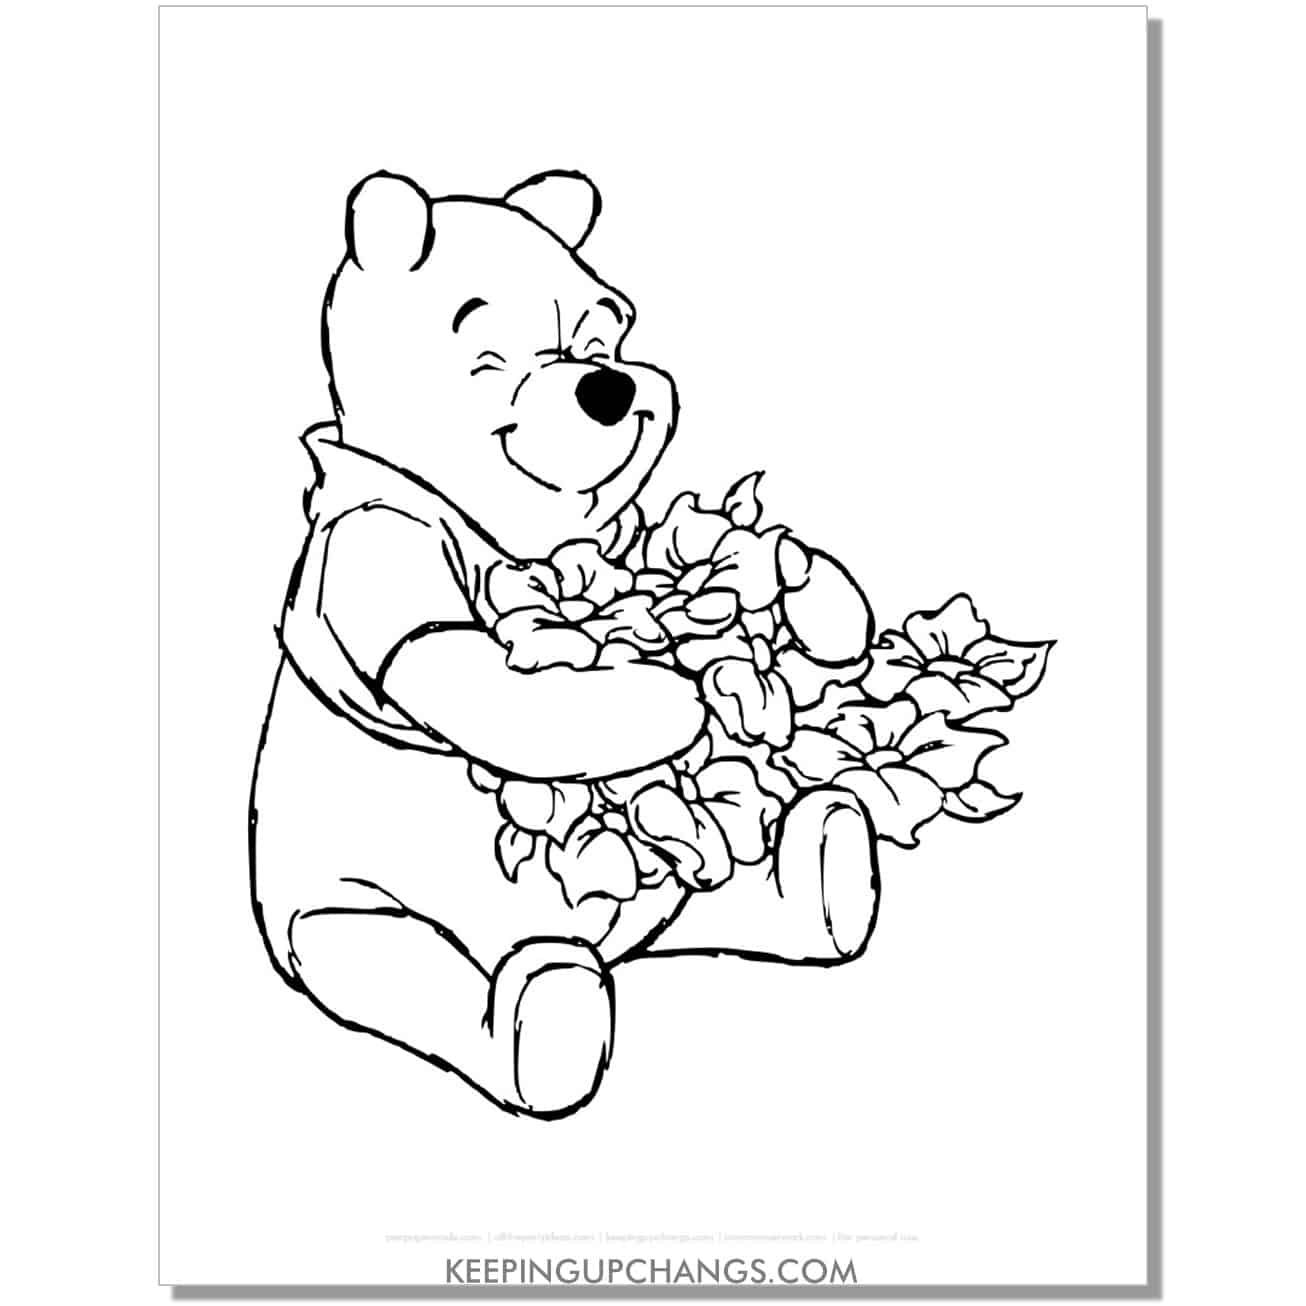 winnie the pooh holding flowers coloring page, sheet.